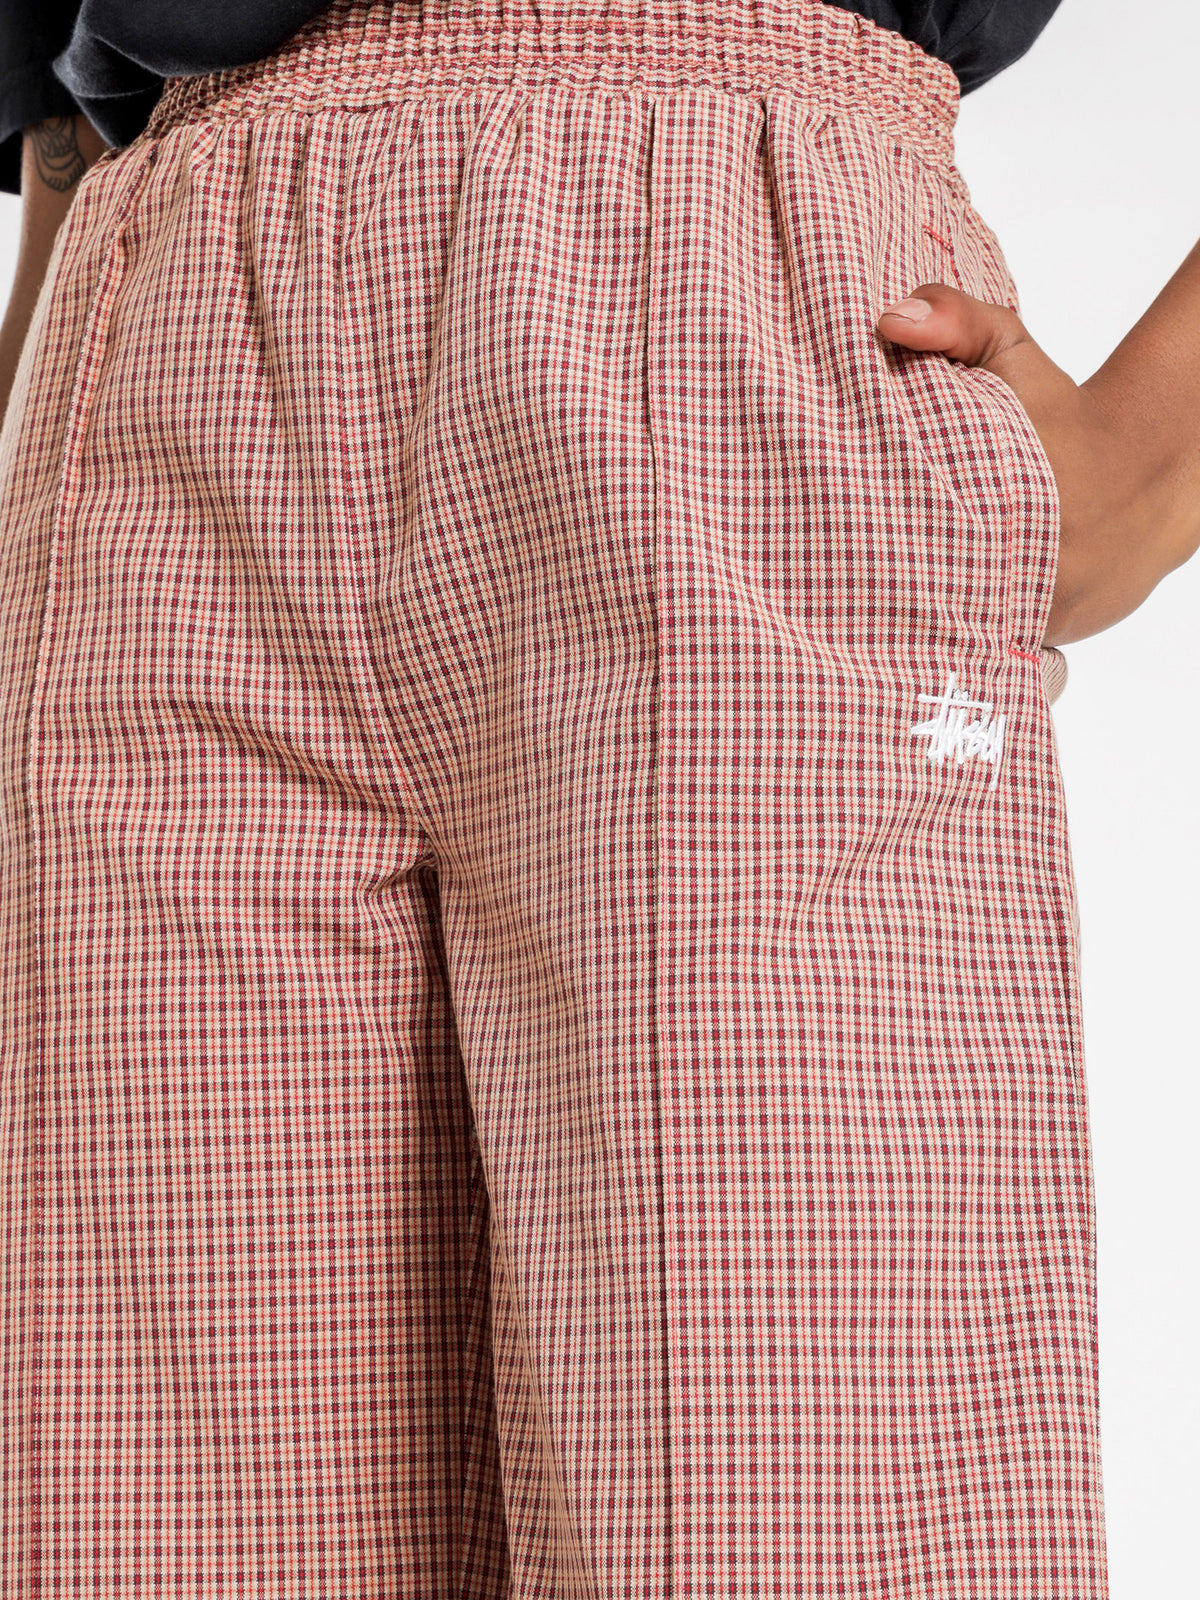 Airlie Check Trackpants in Rosette